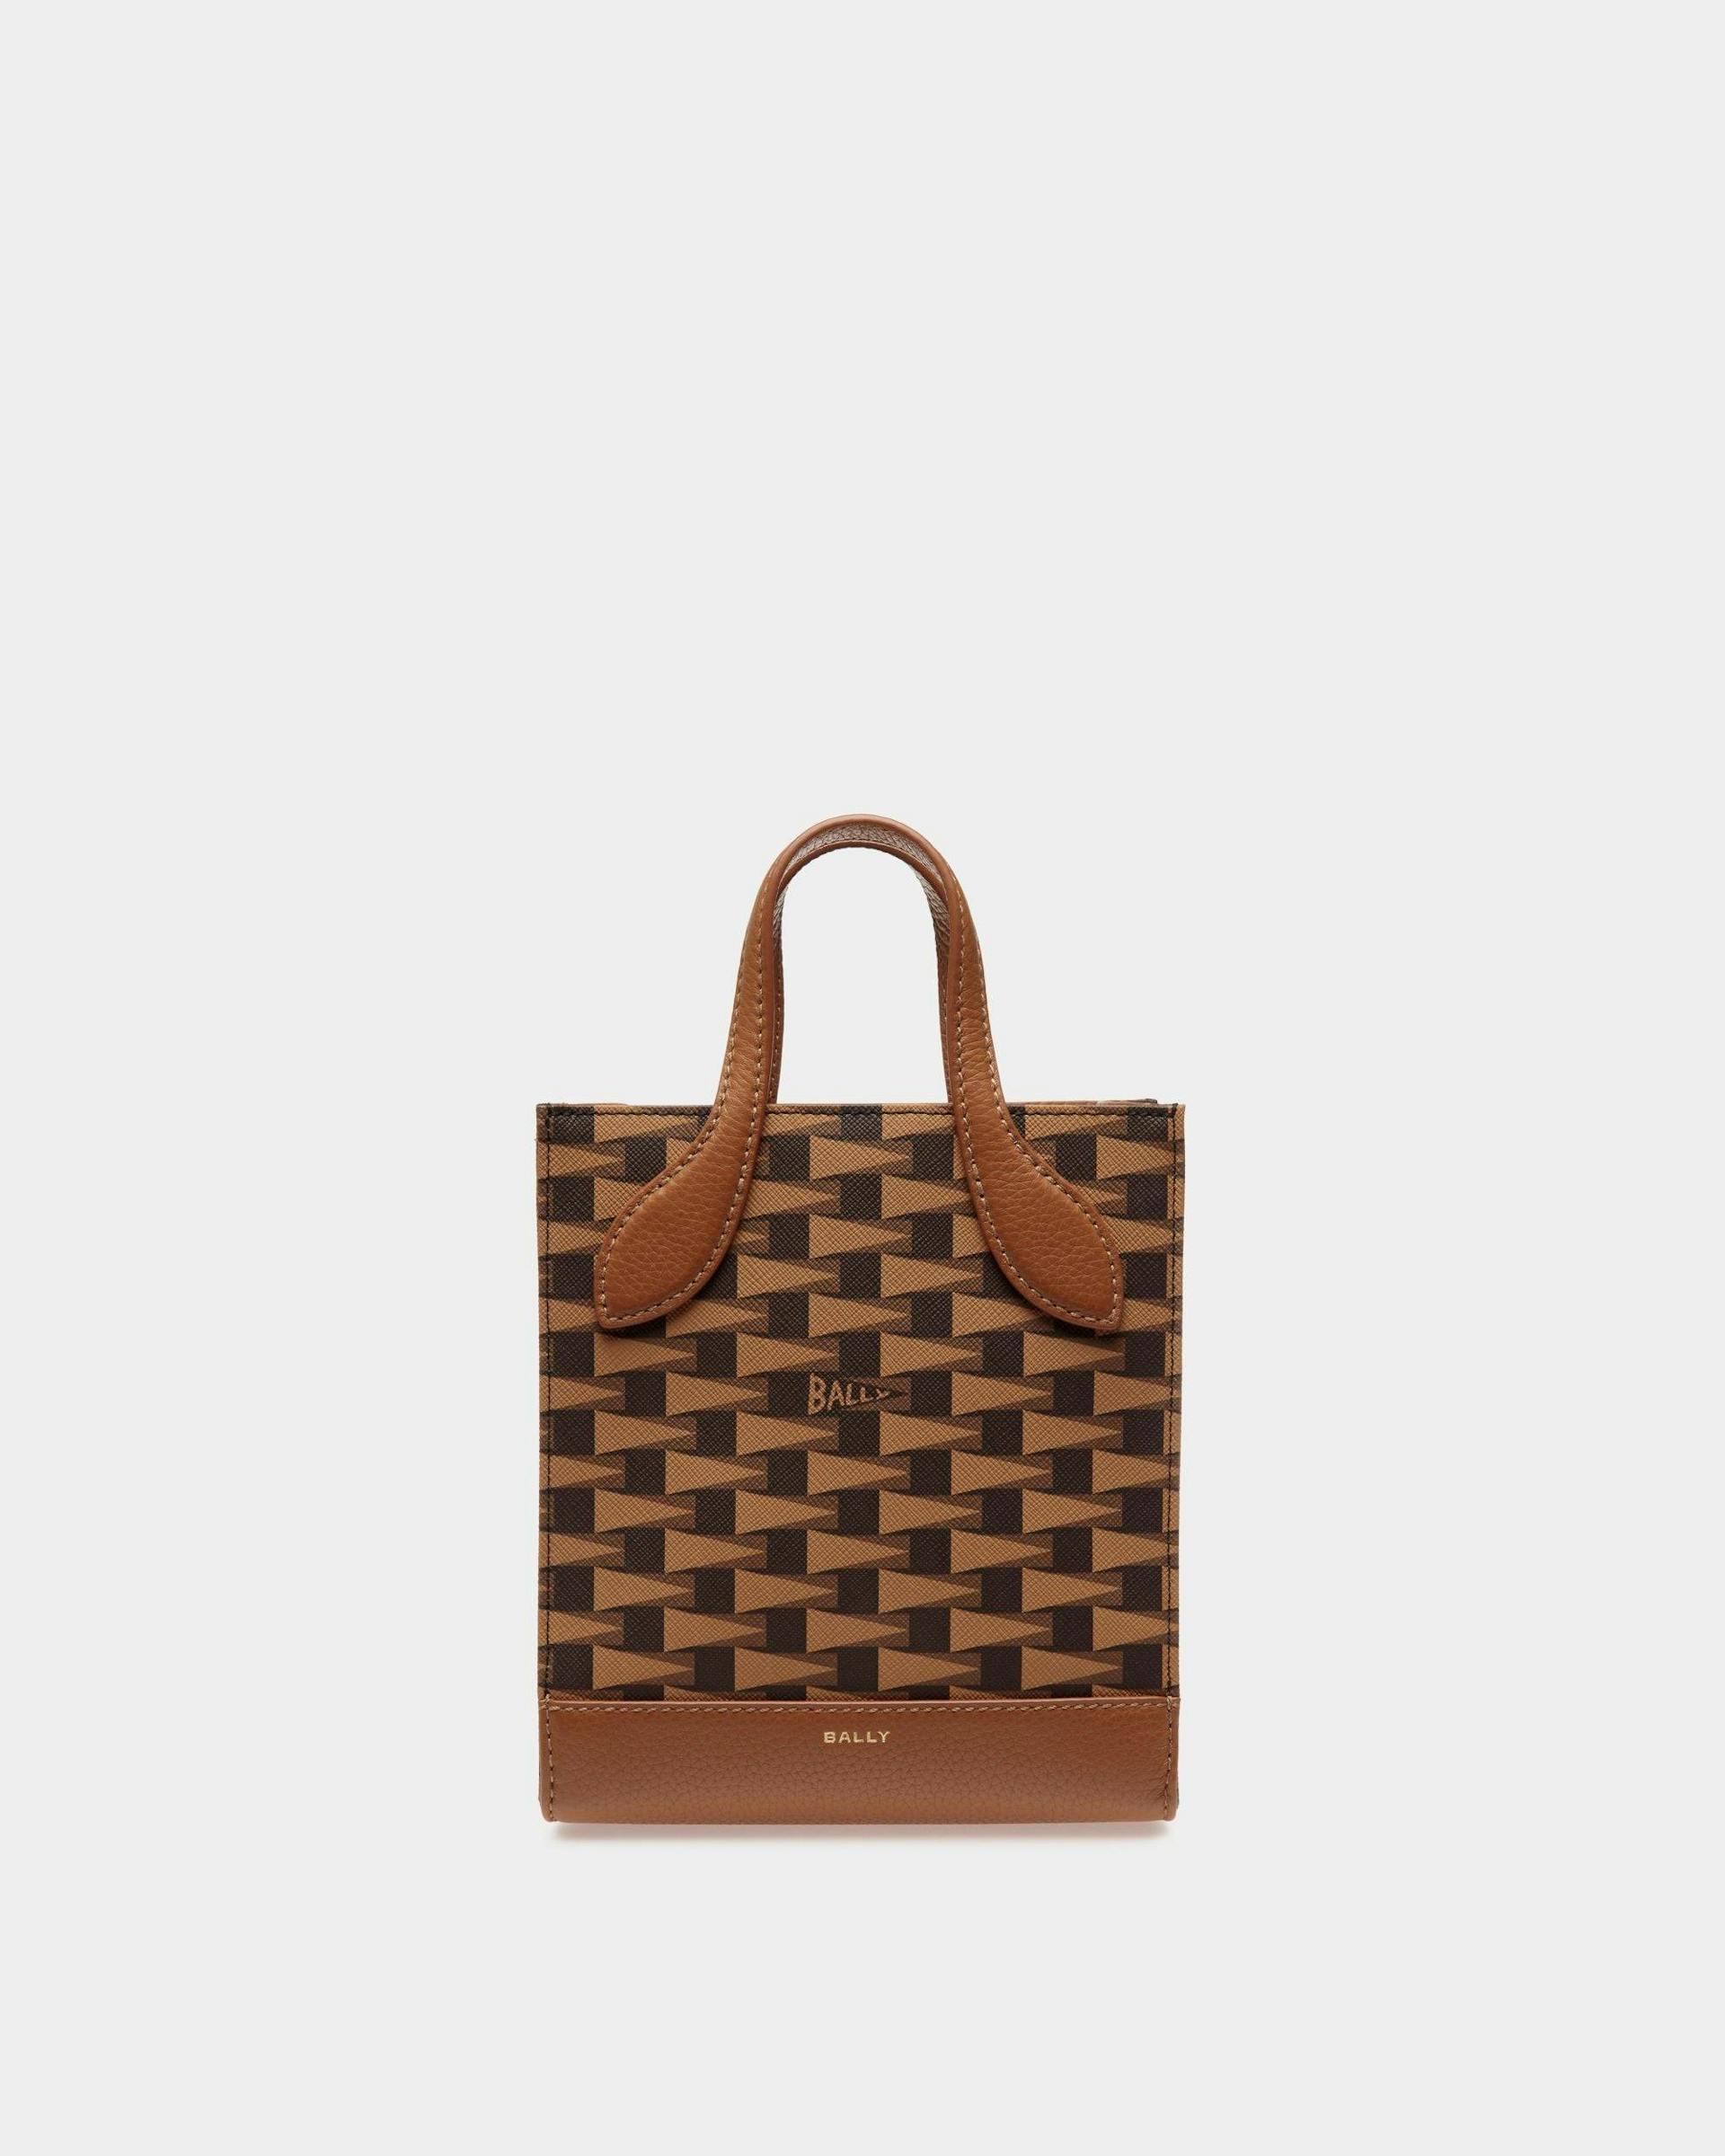 Women's Pennant Mini Tote Bag in Brown Pennant Motif TPU | Bally | Still Life Front